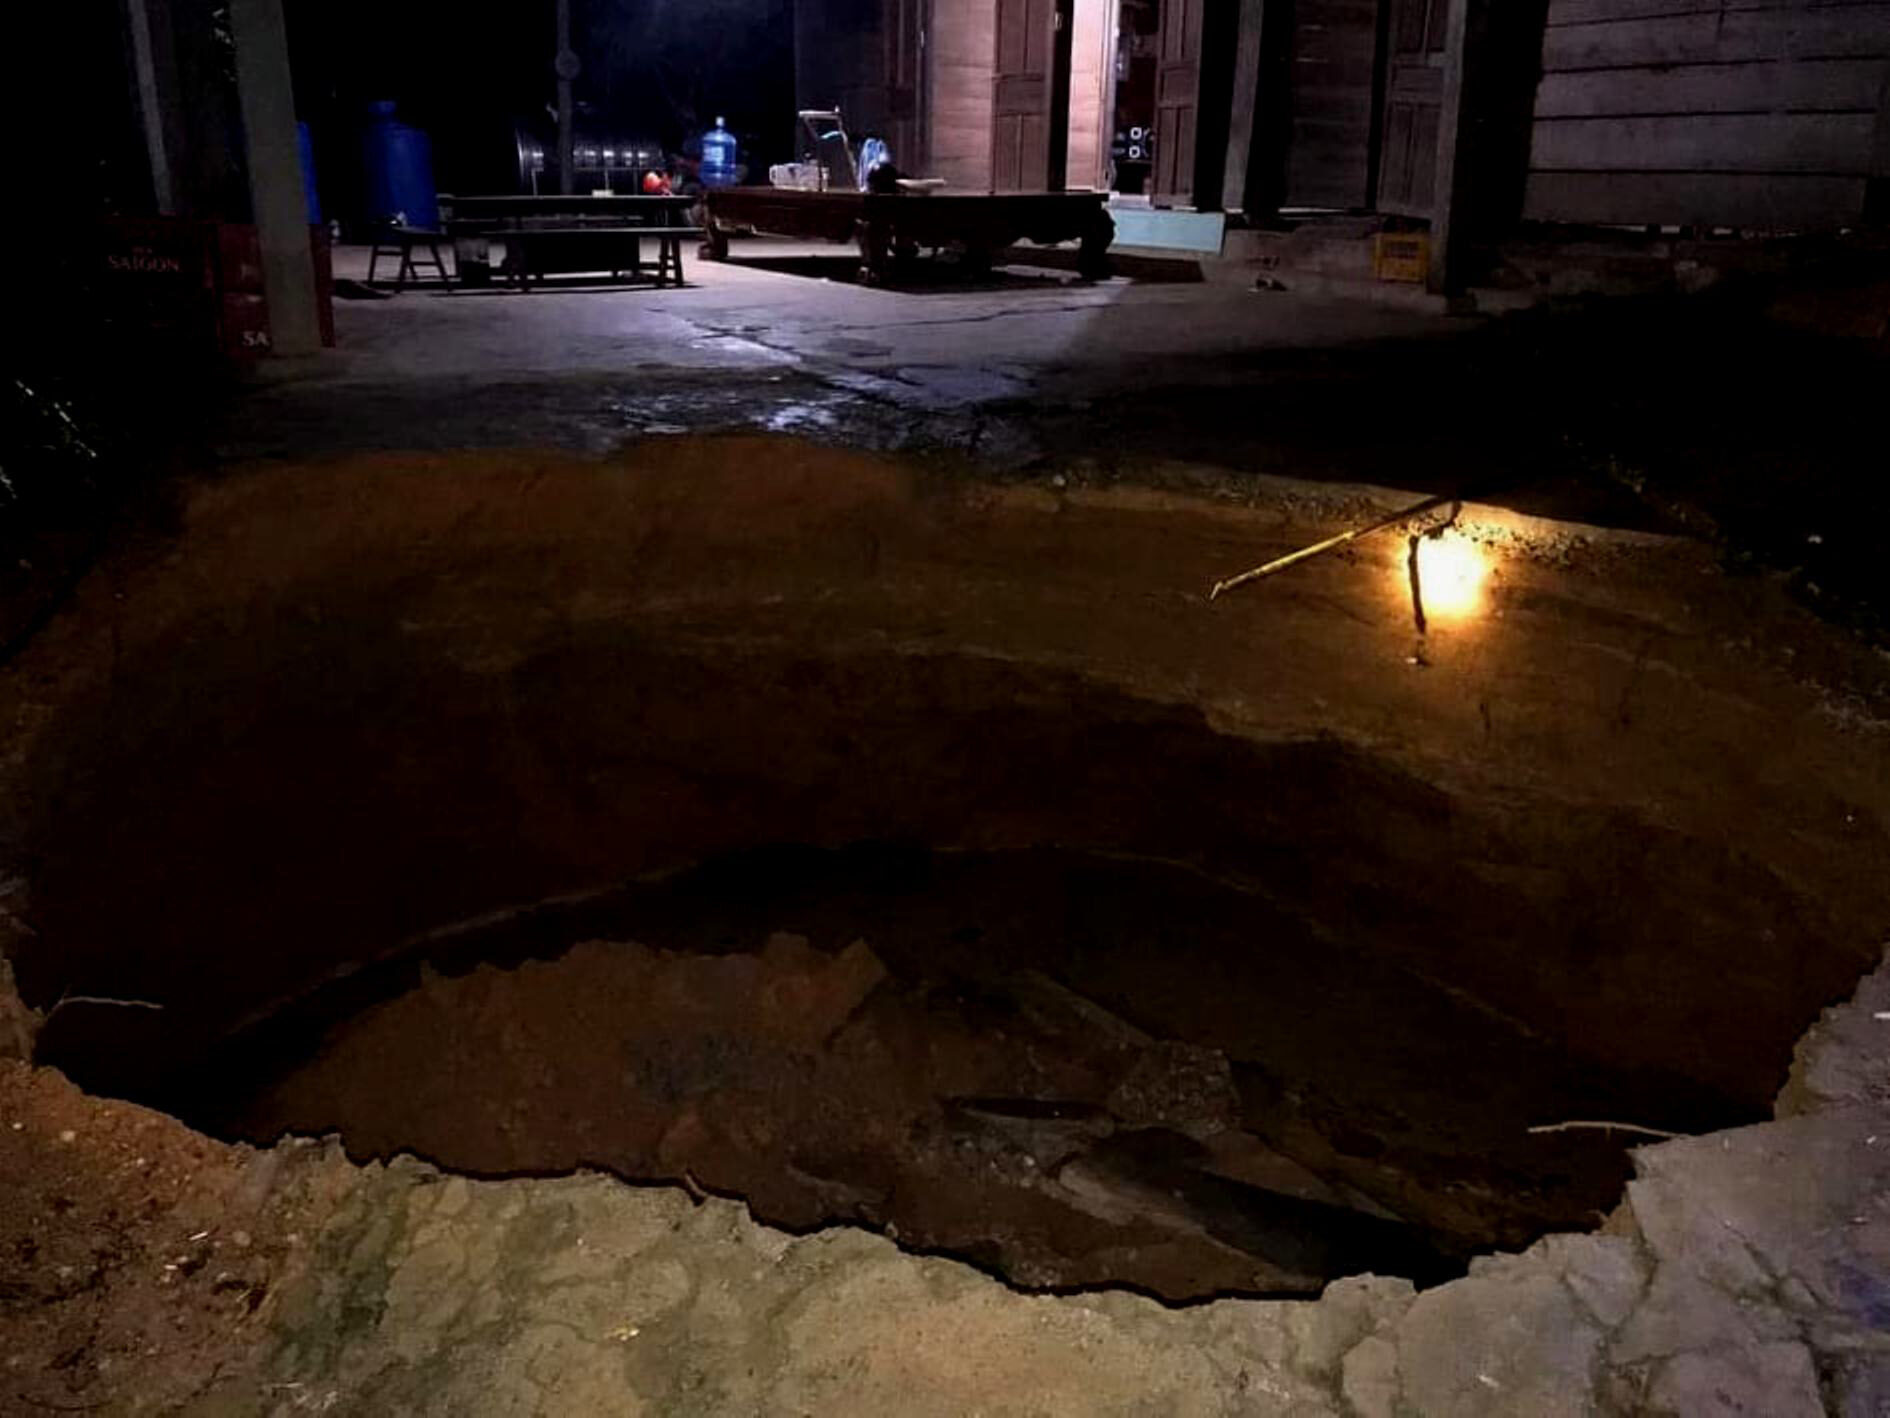 A large sinkhole emerges in the front yard of a house in Quang Binh Province, Vietnam, September 28, 2020.